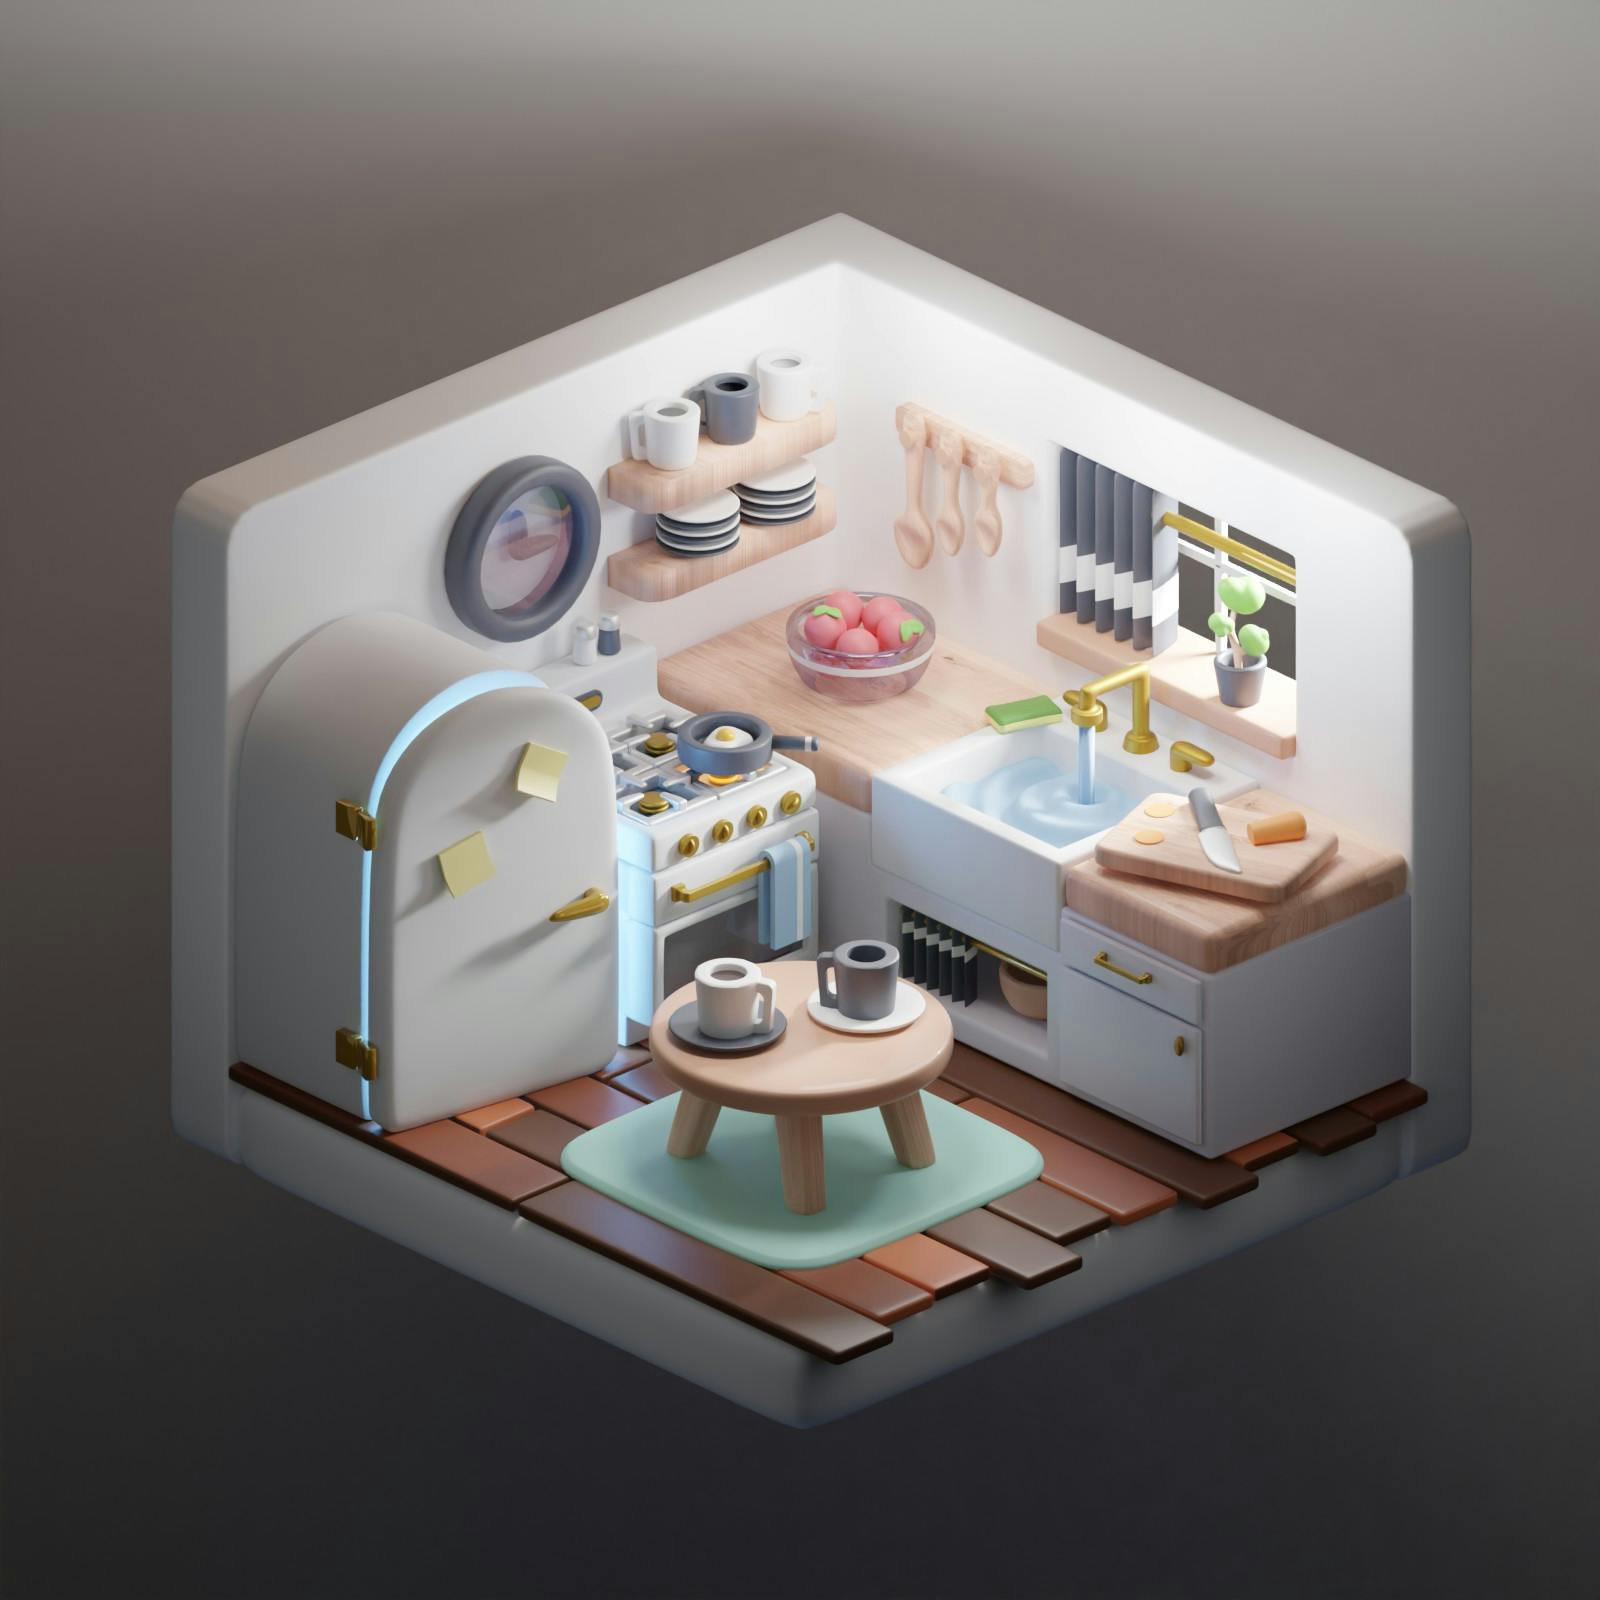 A 3D rendering of an isometric kitchen scene created by Ian Steele